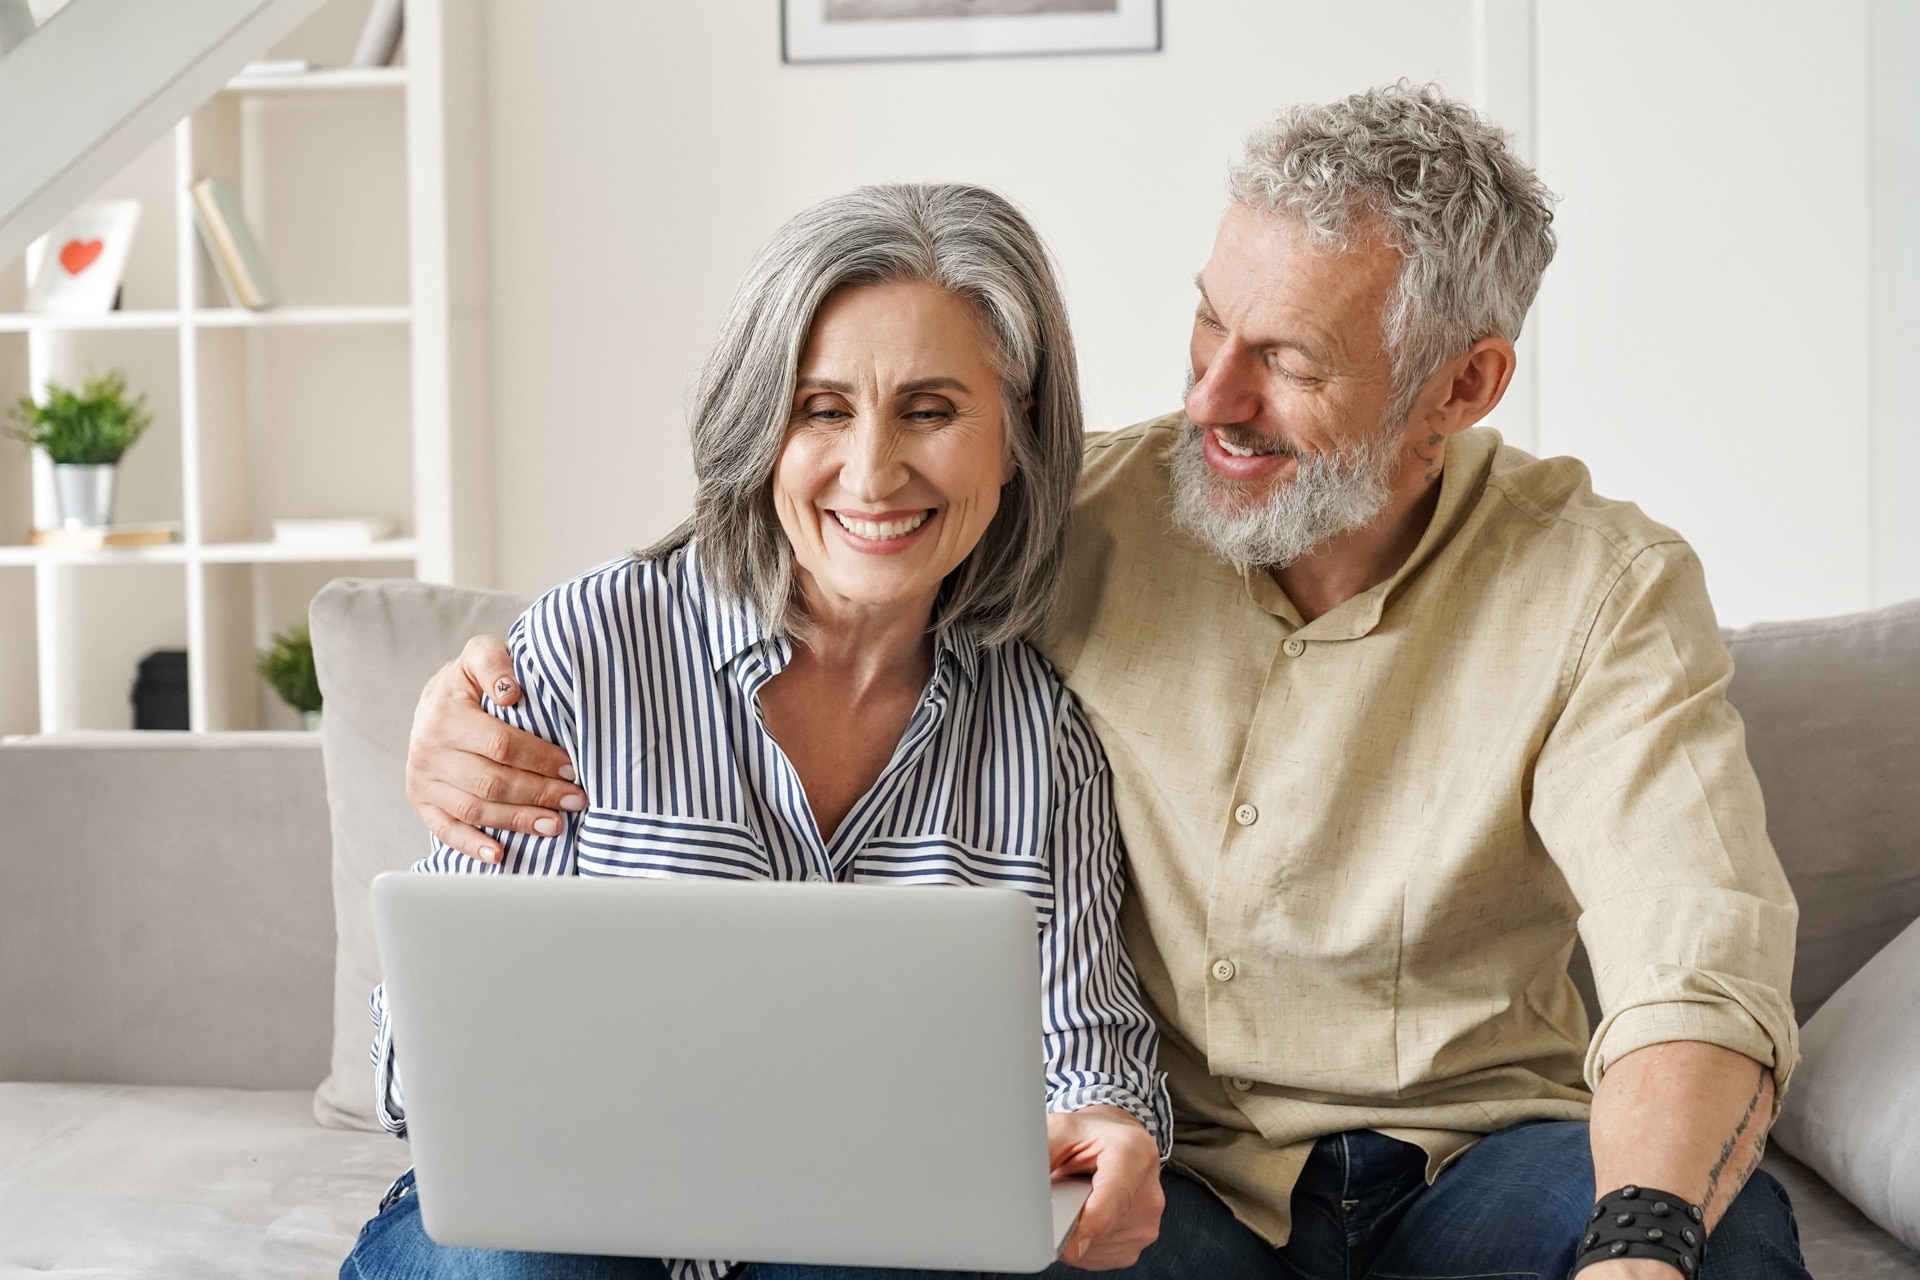 Happy mature mid age couple using laptop sit on sofa doing ecommerce shopping online on website. Smiling senior old adult man and woman looking at computer buying insurance browsing internet at home.; Shutterstock ID 2014559789; purchase_order: -; job: -; client: -; other: -